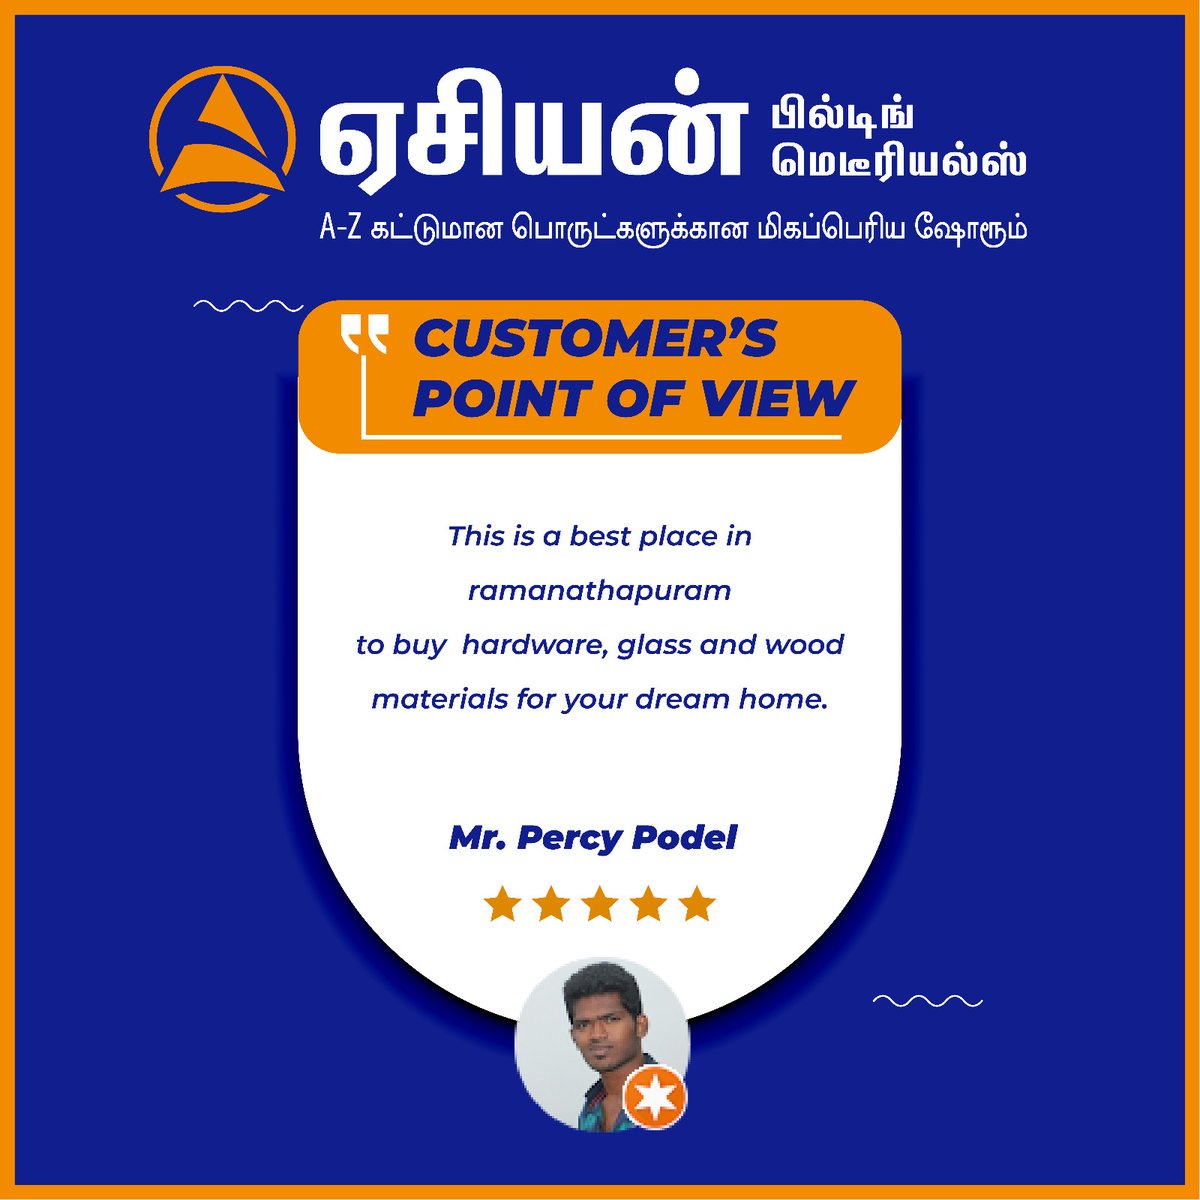 #review #reviewers #googlereview #customerfeedback #customersatisfaction #customerservice #customerreview #customerexperience